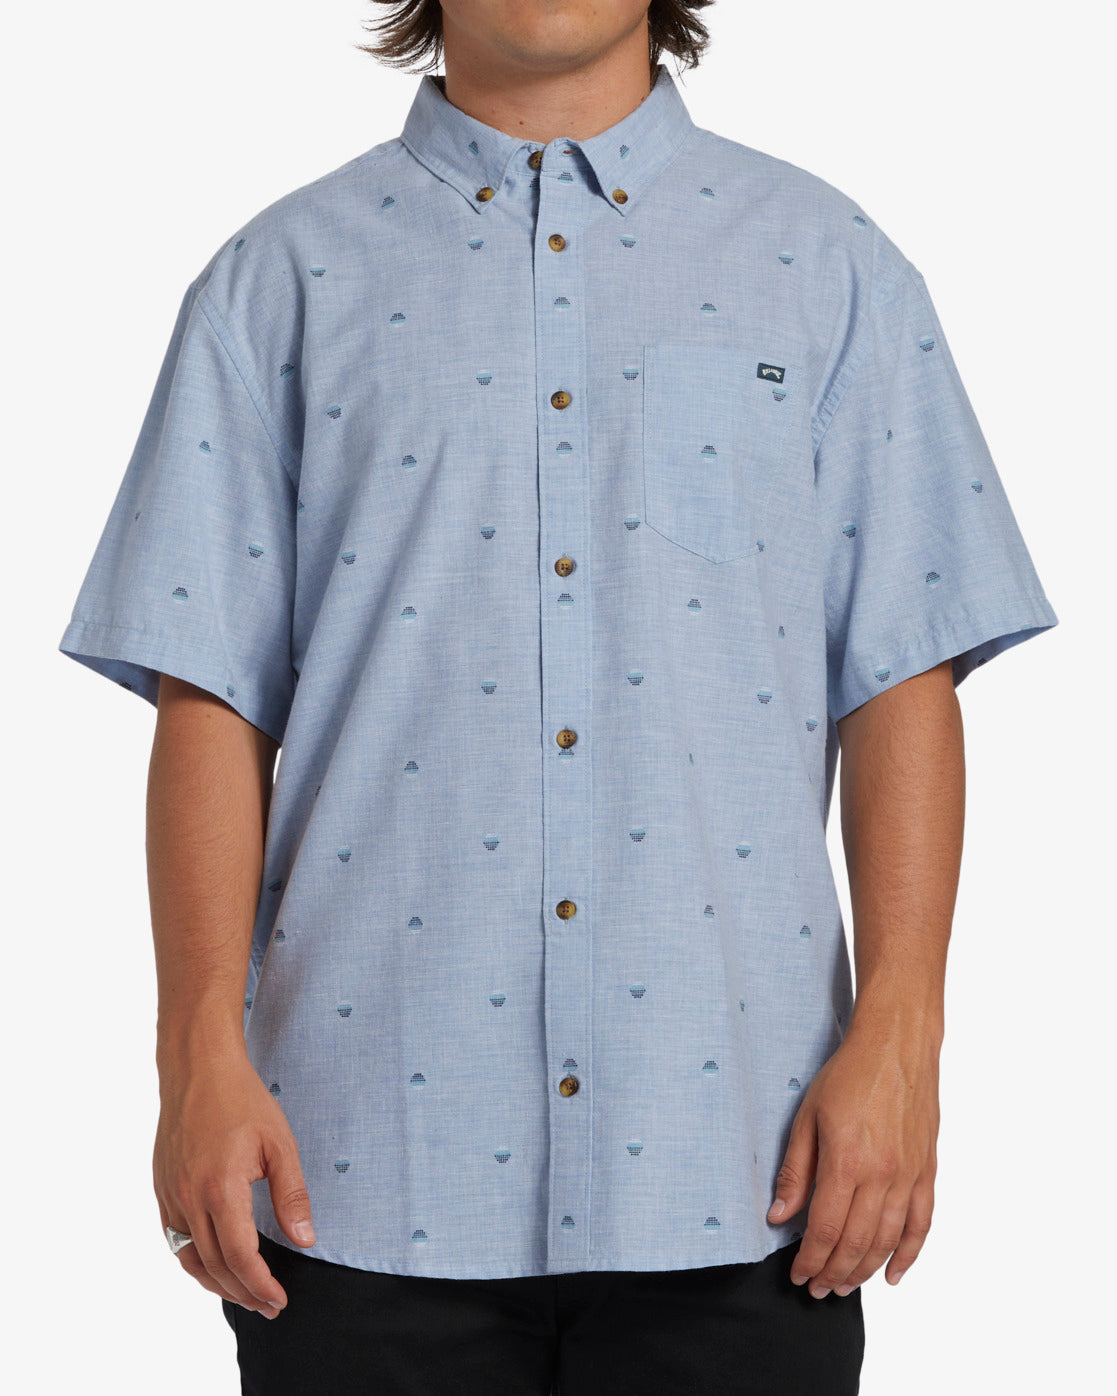 All Day Jacquard Short Sleeve Woven Shirt - Washed Blue